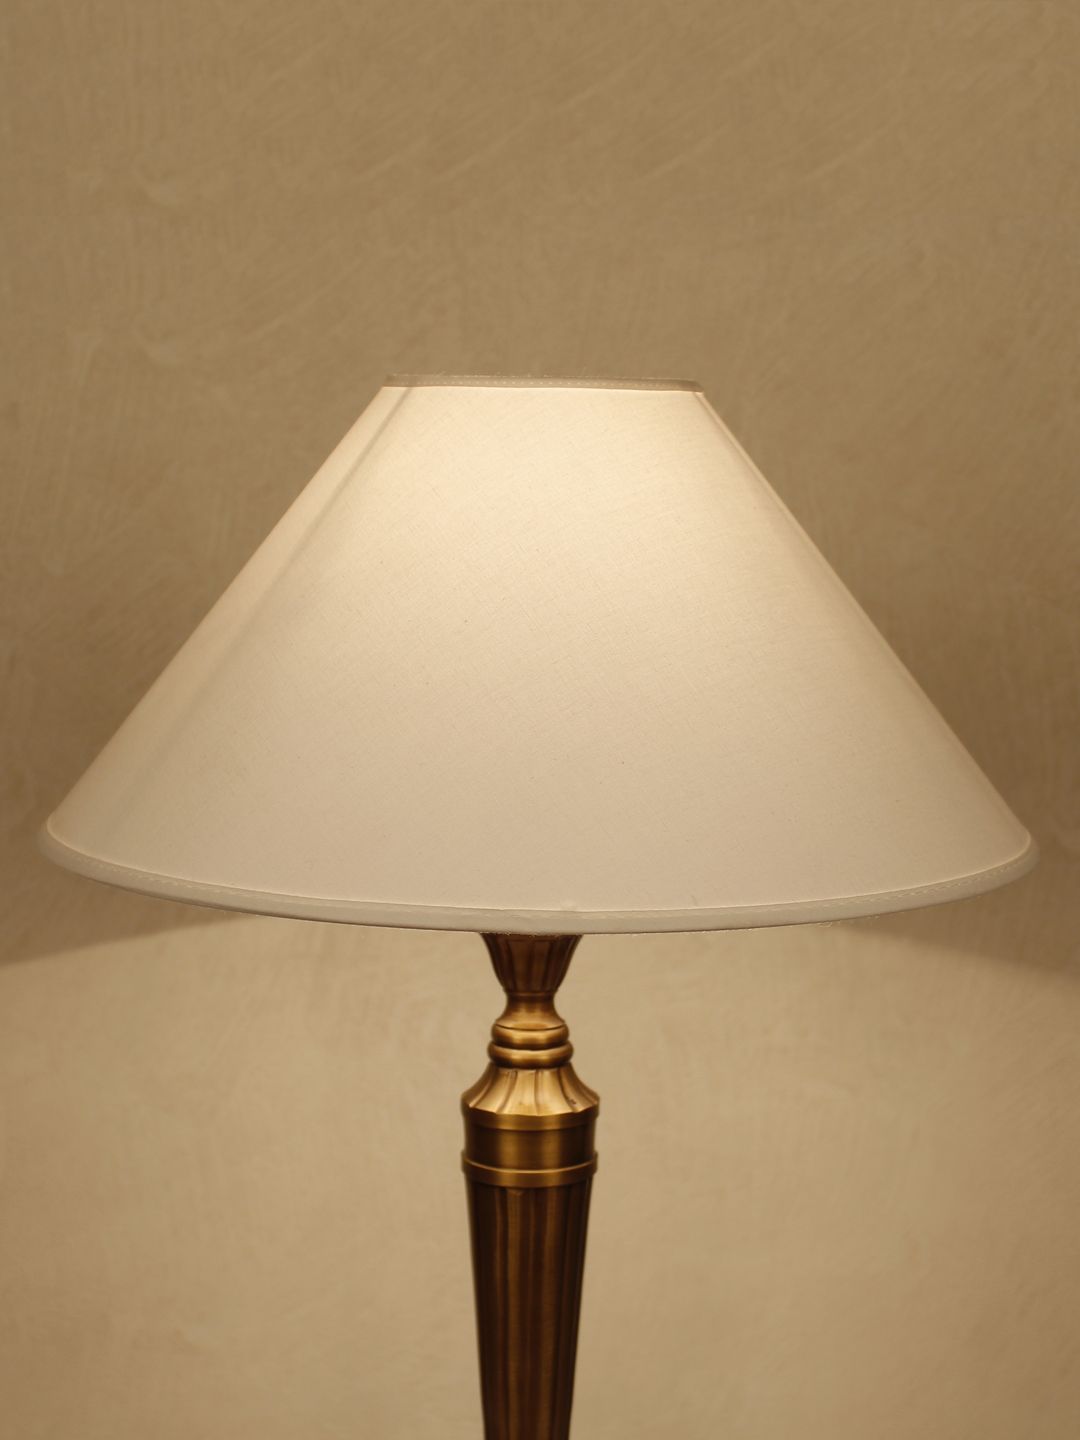 THE LIGHT STORE White Table Top Lamp Shade Price in India